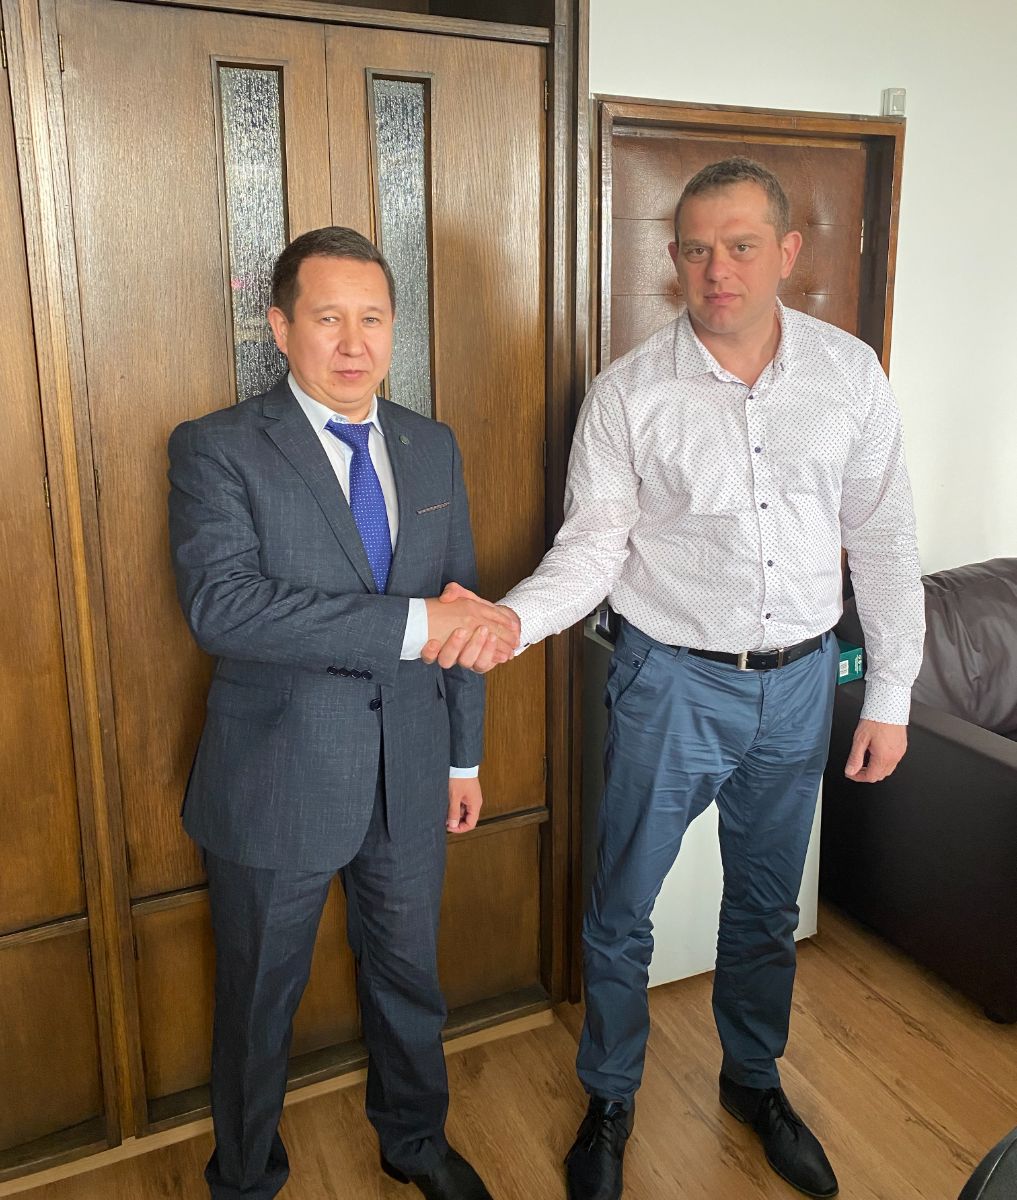 On May 31, 2022, the Embassy of the Kyrgyz Republic in the Republic of Bulgaria with a residence in the city of Kyiv met with the Head of the Department of the Directorate of Eastern Europe and Central Asia of the Ministry of Foreign Affairs of Bulgaria P. Georgiev and the Head of the Department of Visa Policy of the Directorate of Consular Service I. Motev.